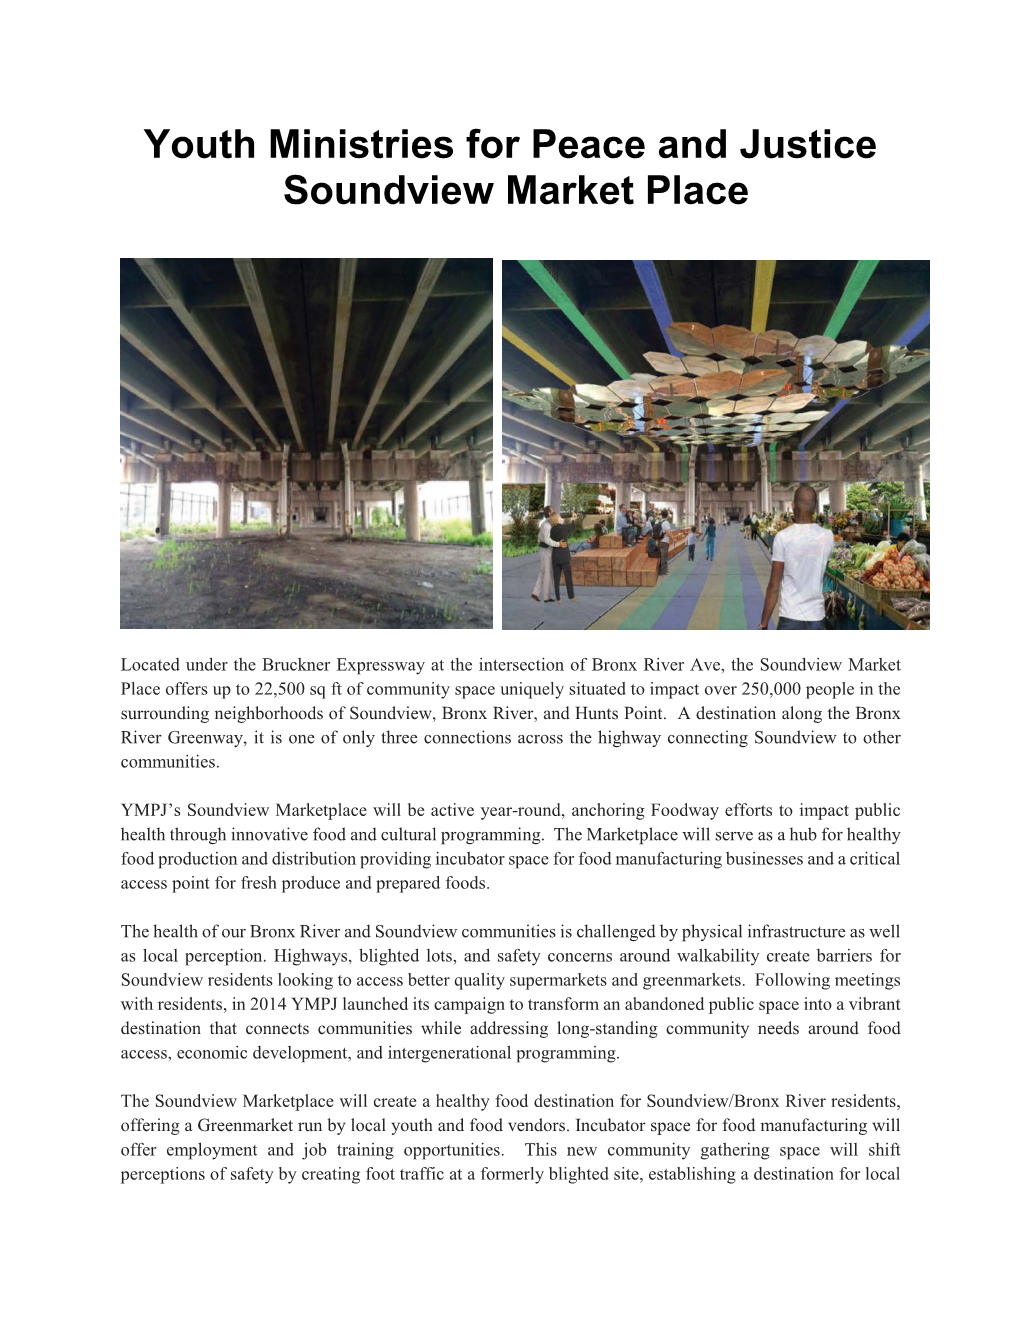 Soundview Marketplace Will Be Active Year-Round, Anchoring Foodway Efforts to Impact Public Health Through Innovative Food and Cultural Programming